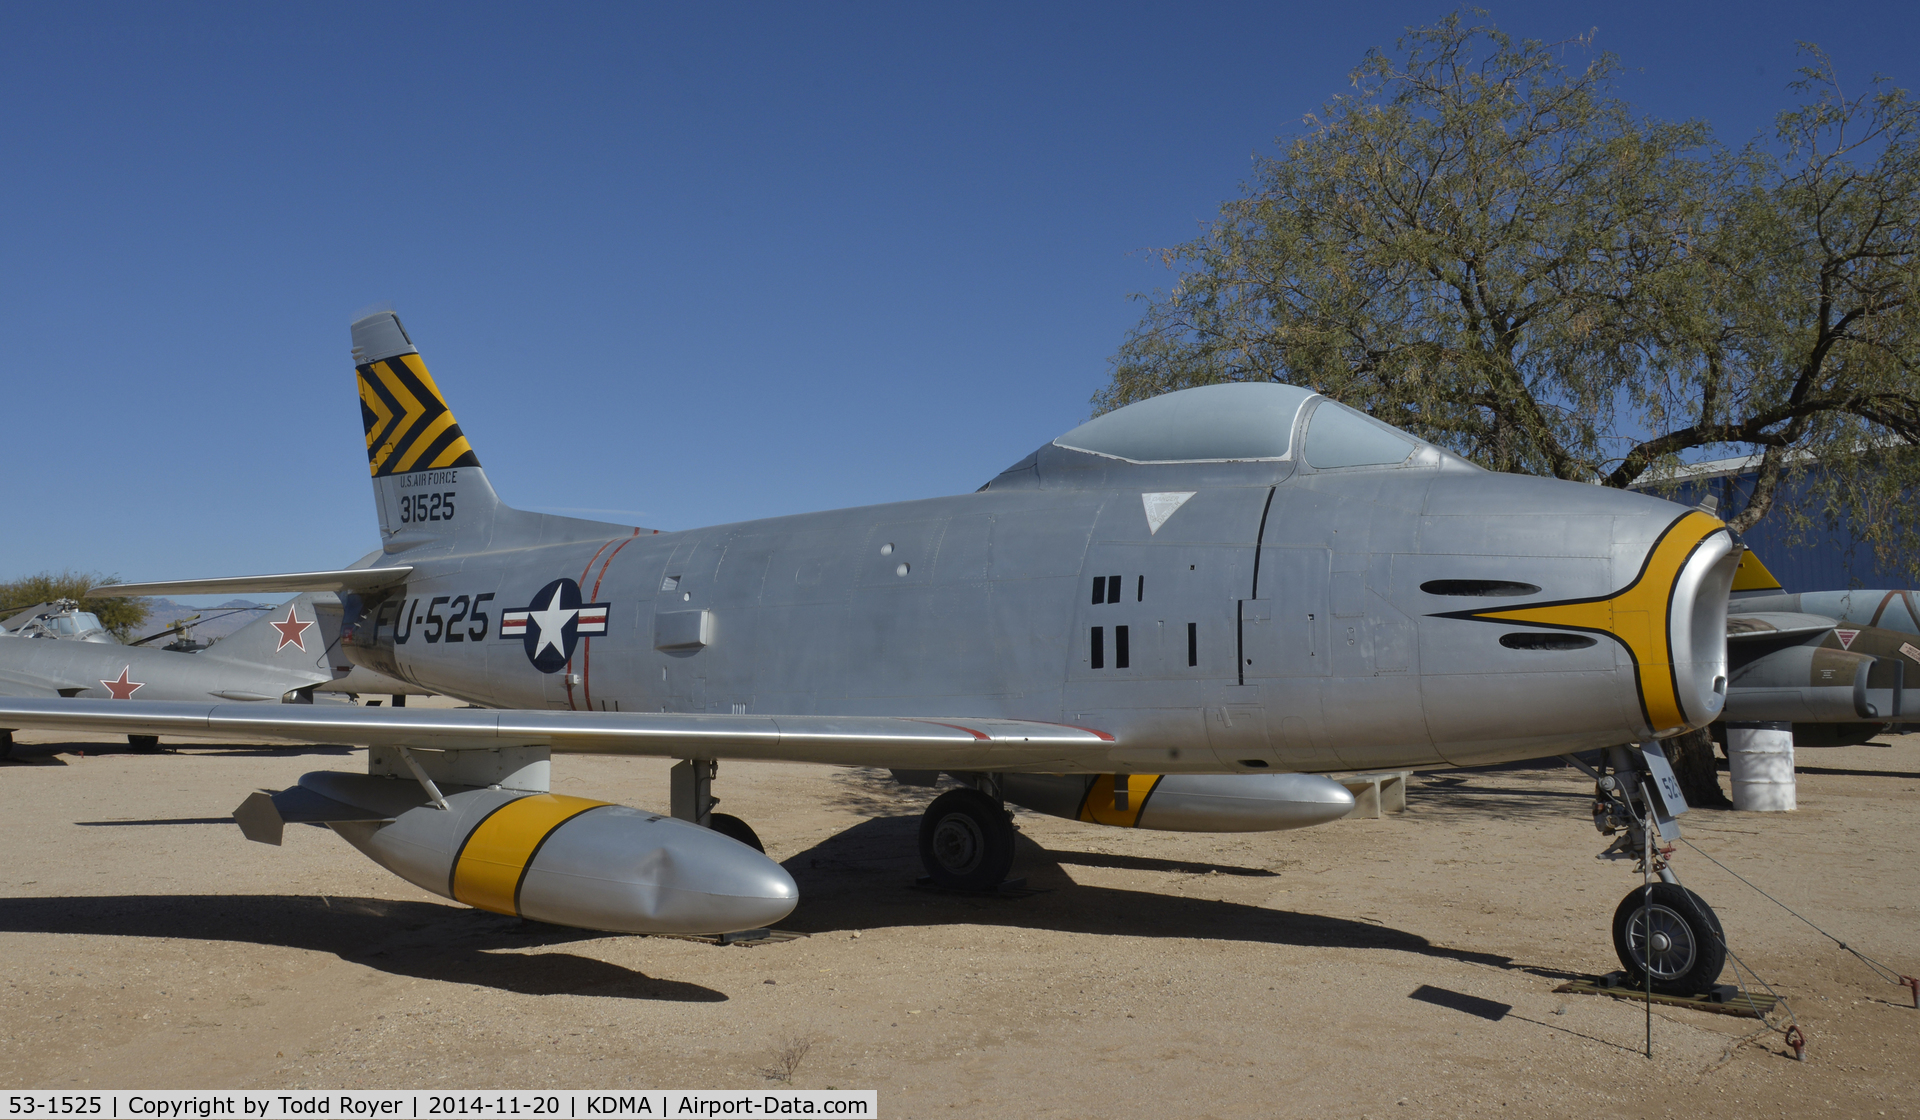 53-1525, 1953 North American F-86H Sabre C/N 203-297, On display at the Pima Air and Space Museum